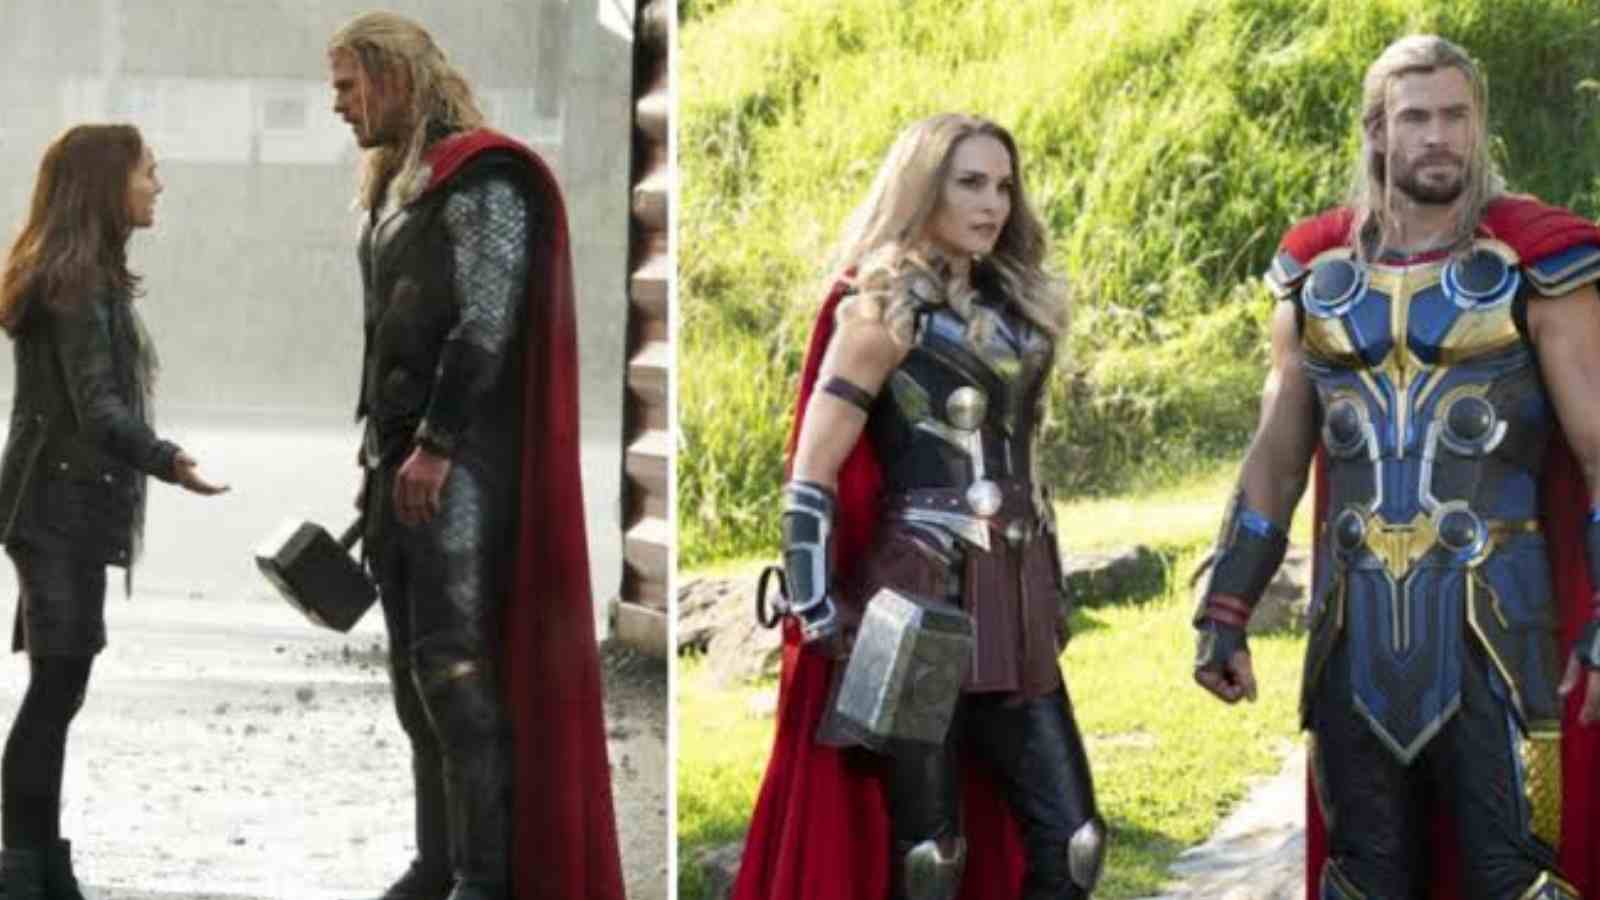 The five-foot-three Portman becomes the six-foot-tall Mighty Thor